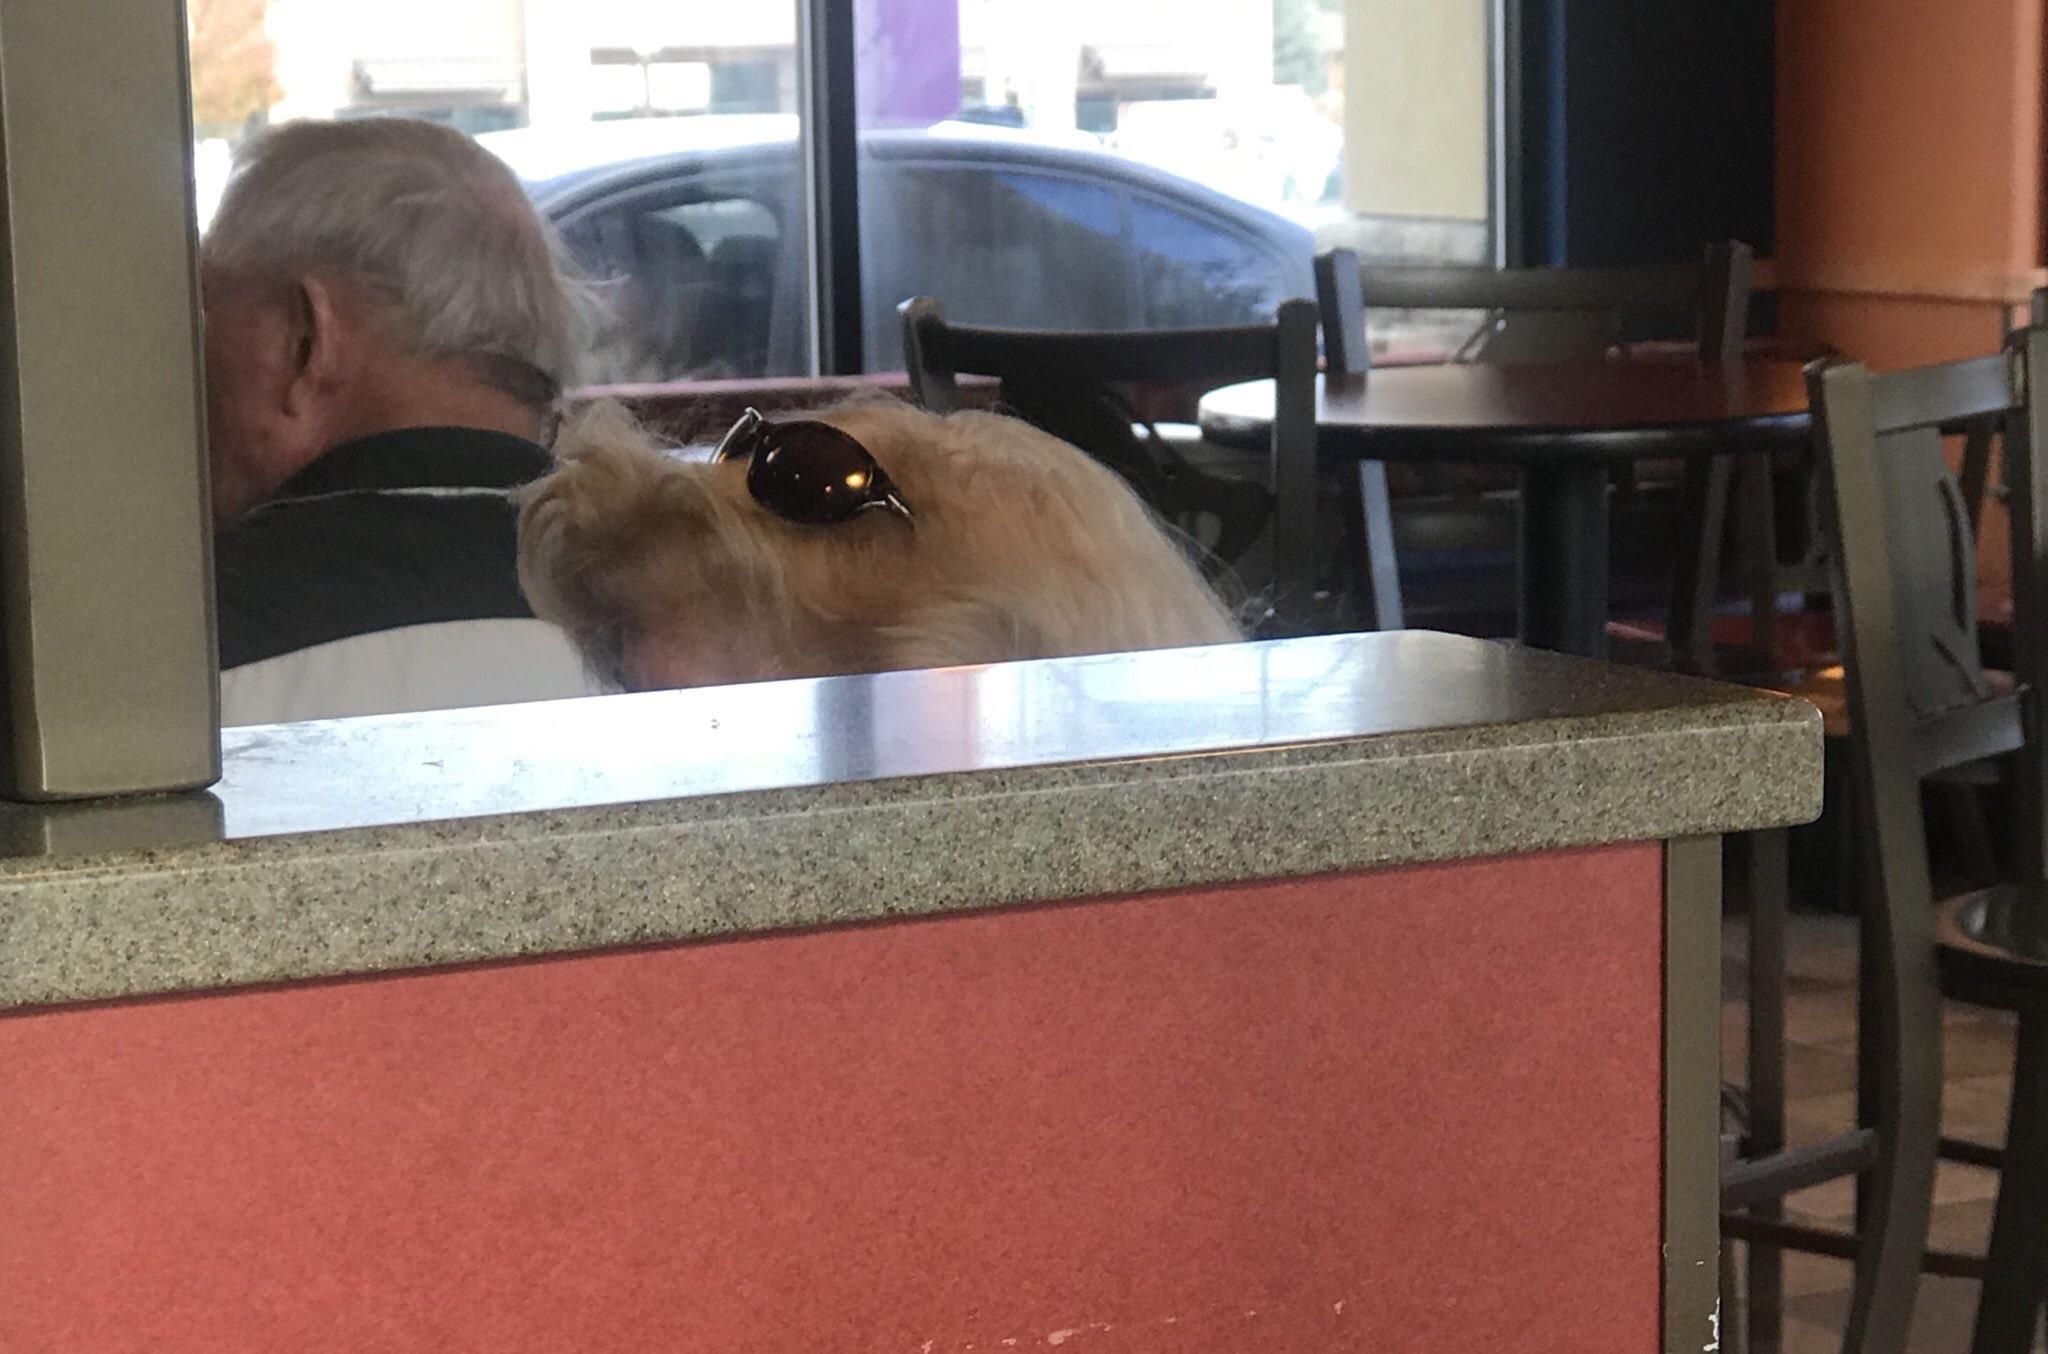 Tell me why I thought this lady’s hair was a dog wearing sunglasses.